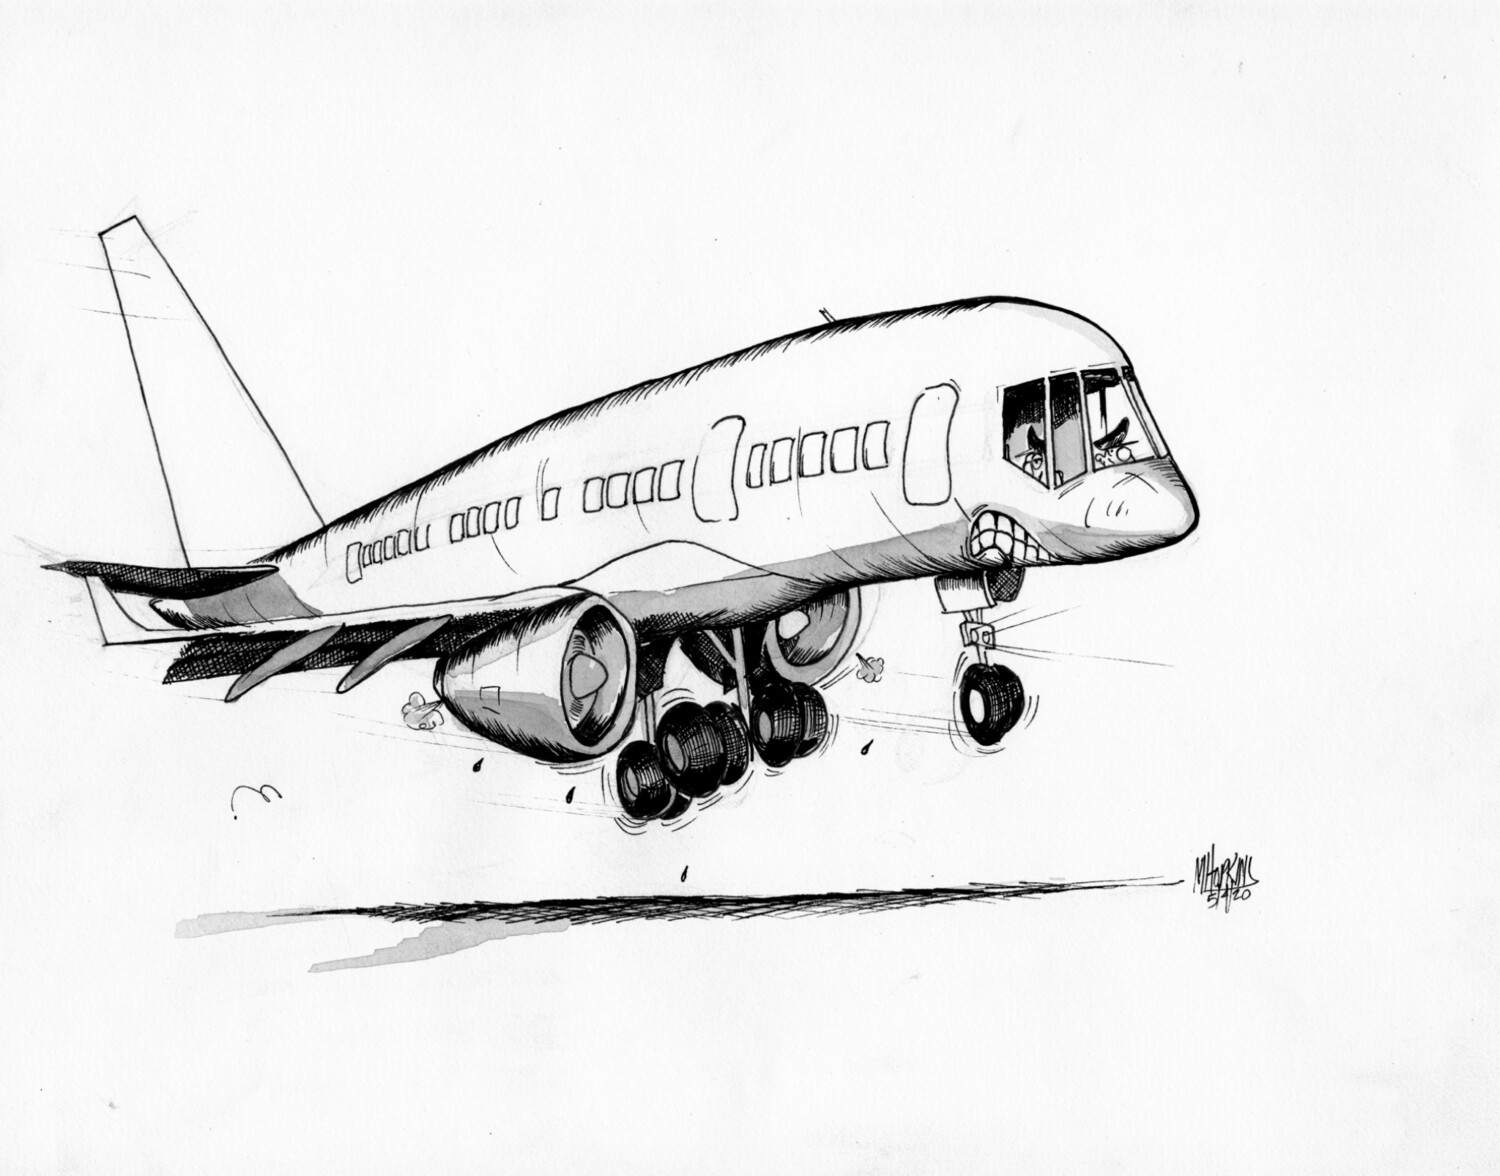 Boeing 757 - Limited Edition Giclée Prints from $50.00 to $100.00